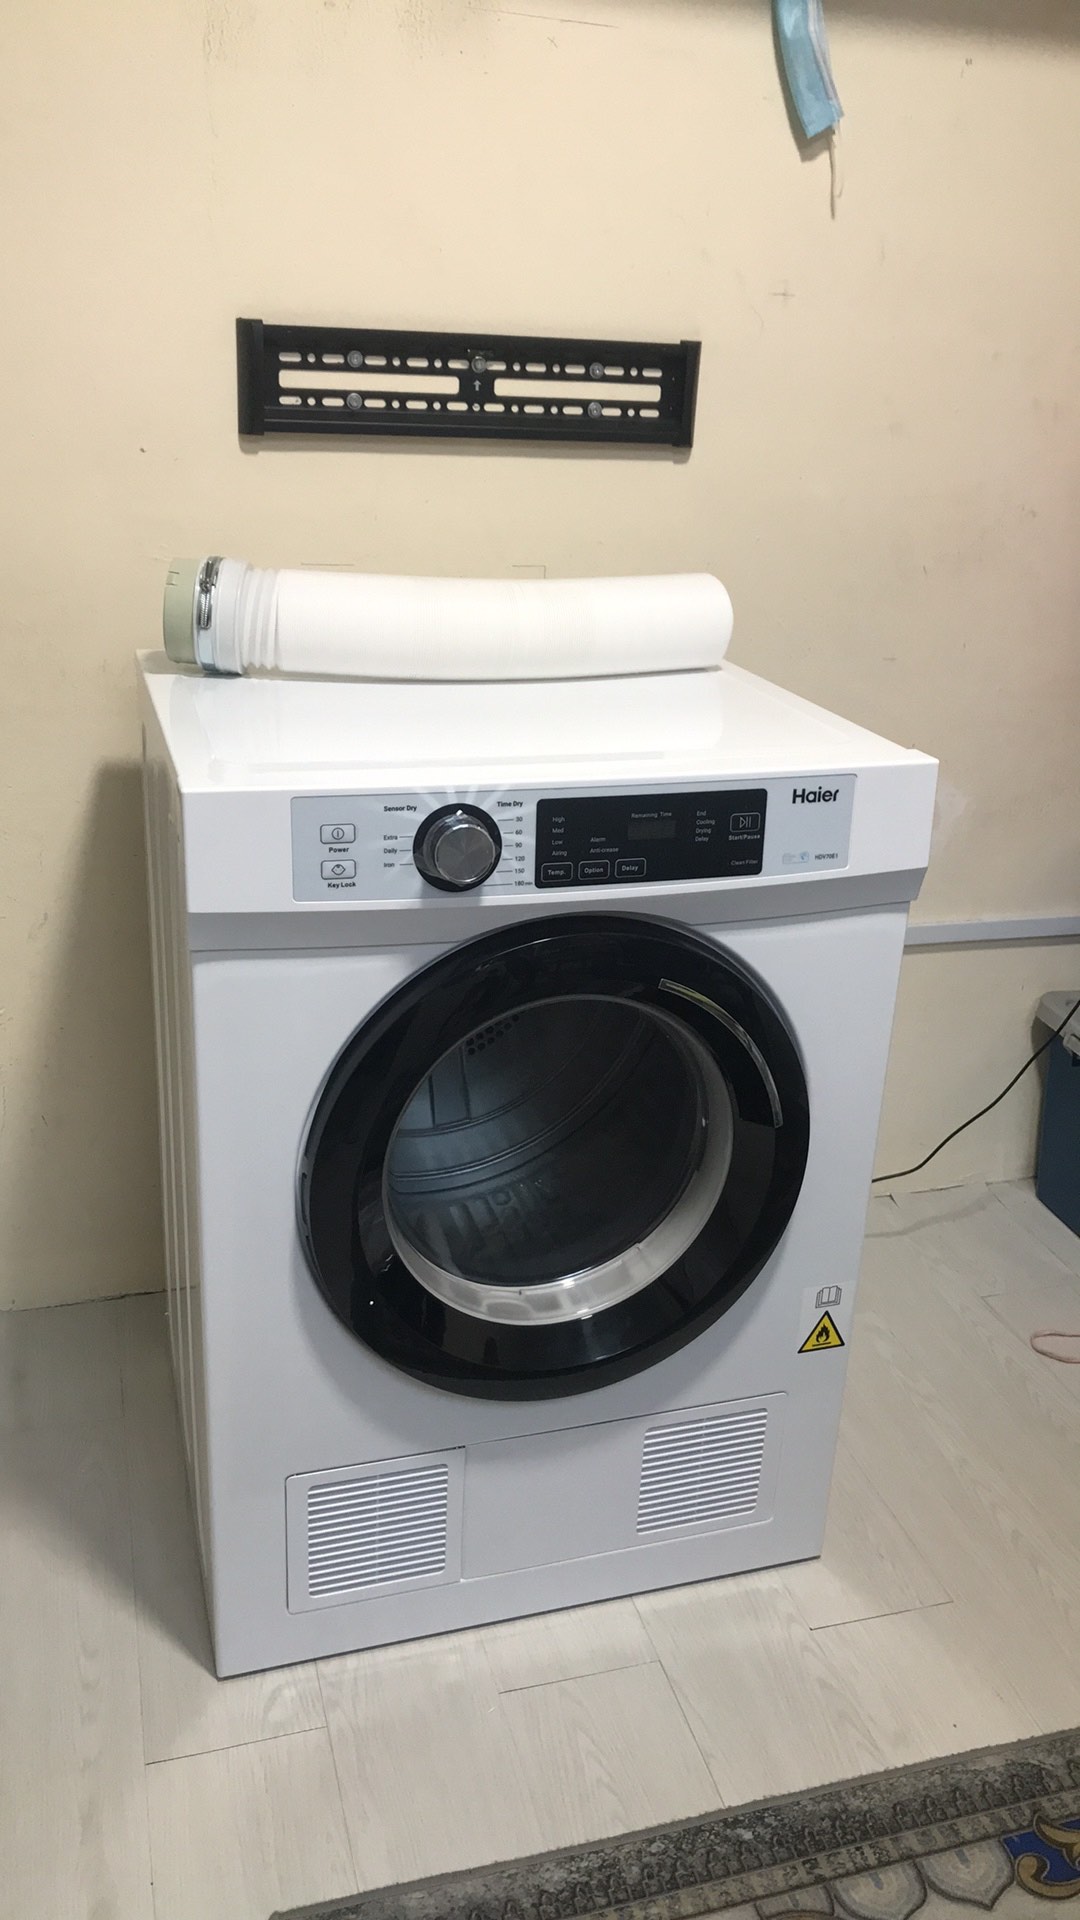 Clothes dryer Malaysia